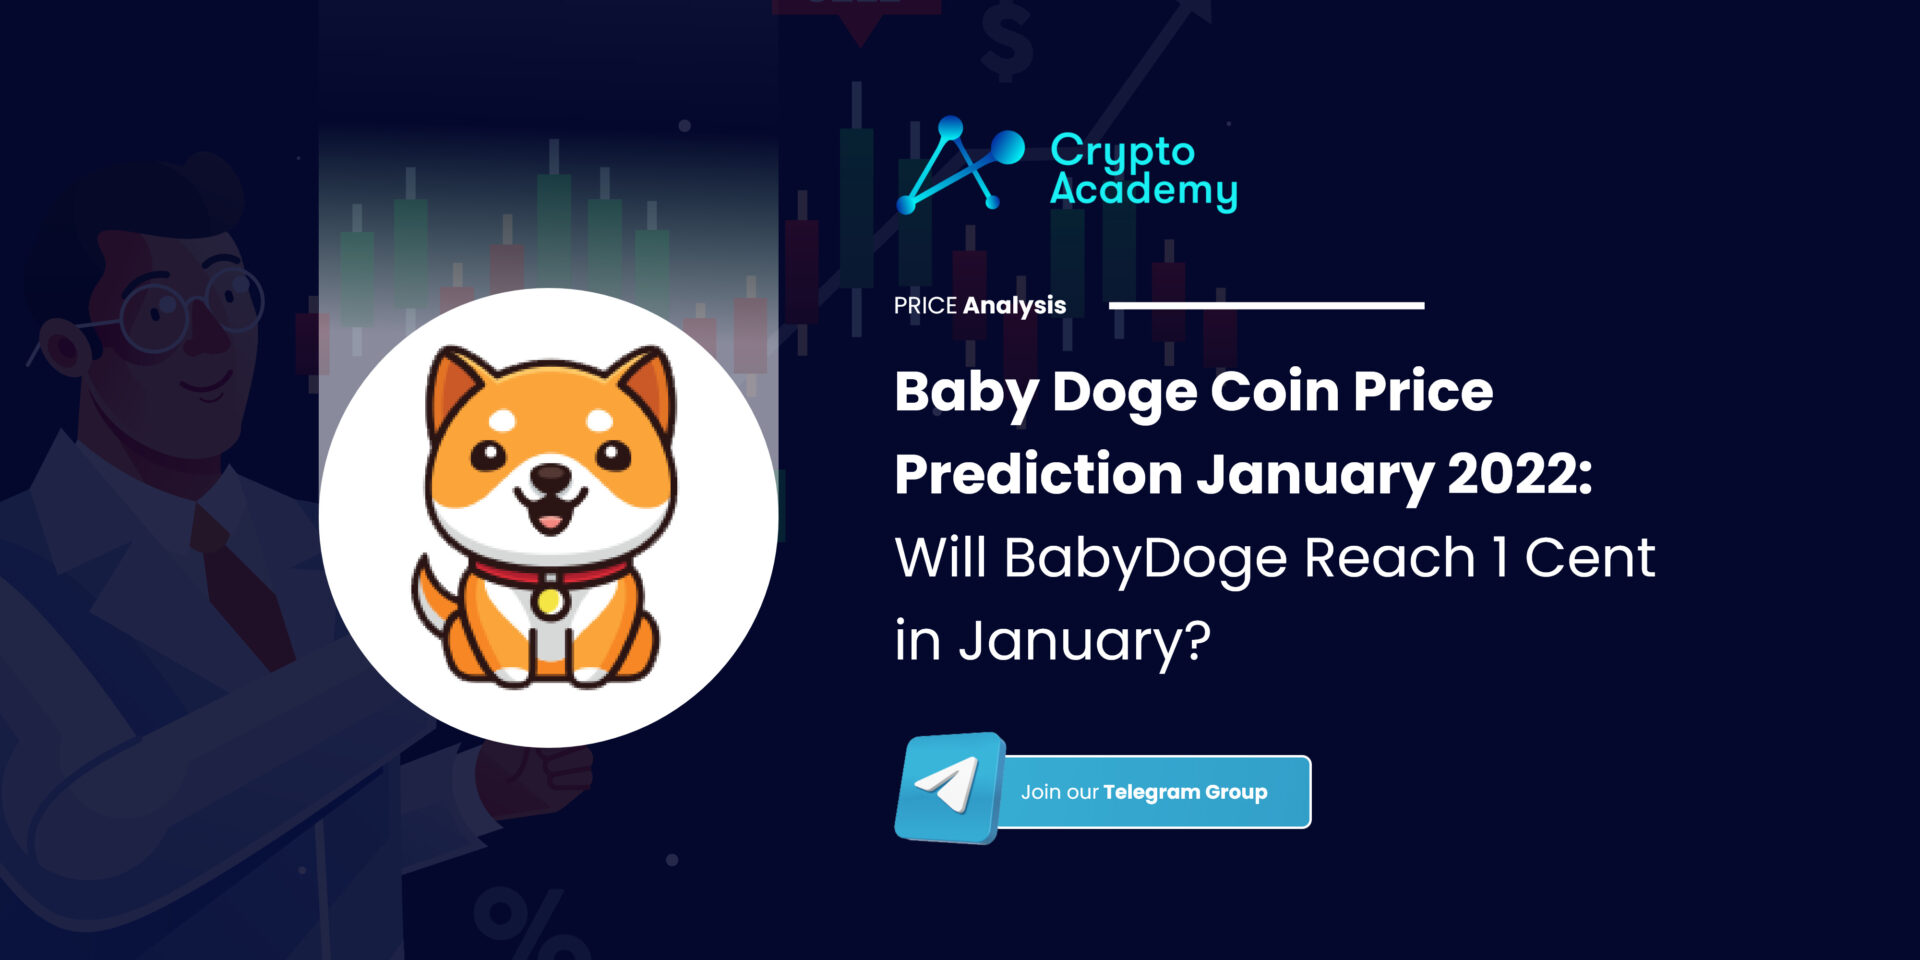 Baby Doge Coin Price Prediction January 2022: Will BabyDoge Reach 1 Cent in January?